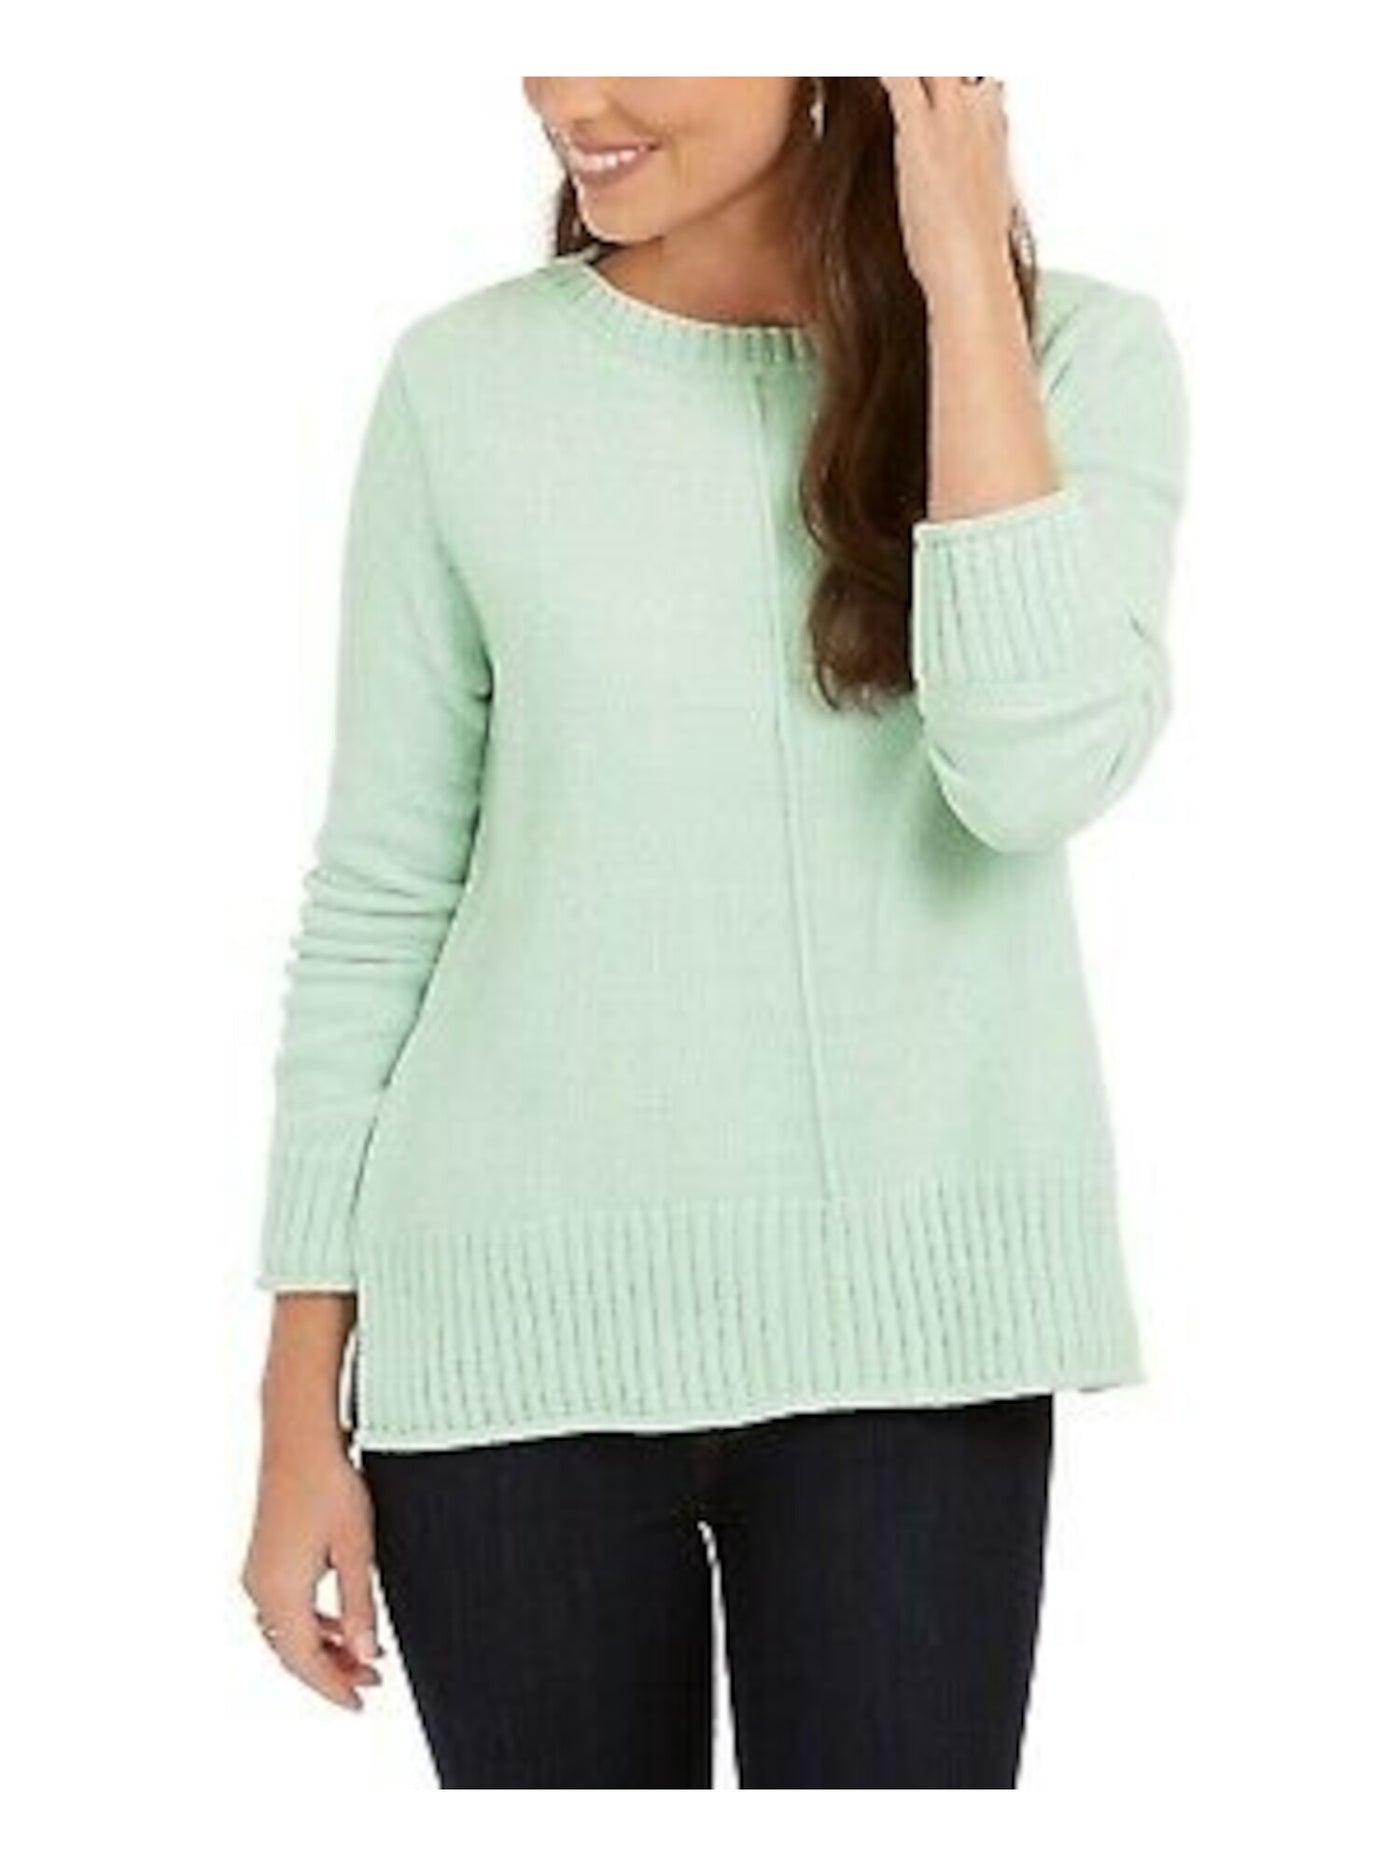 STYLE & COMPANY Womens Green Textured Ribbed 3/4 Sleeve Crew Neck Sweater Petites PS